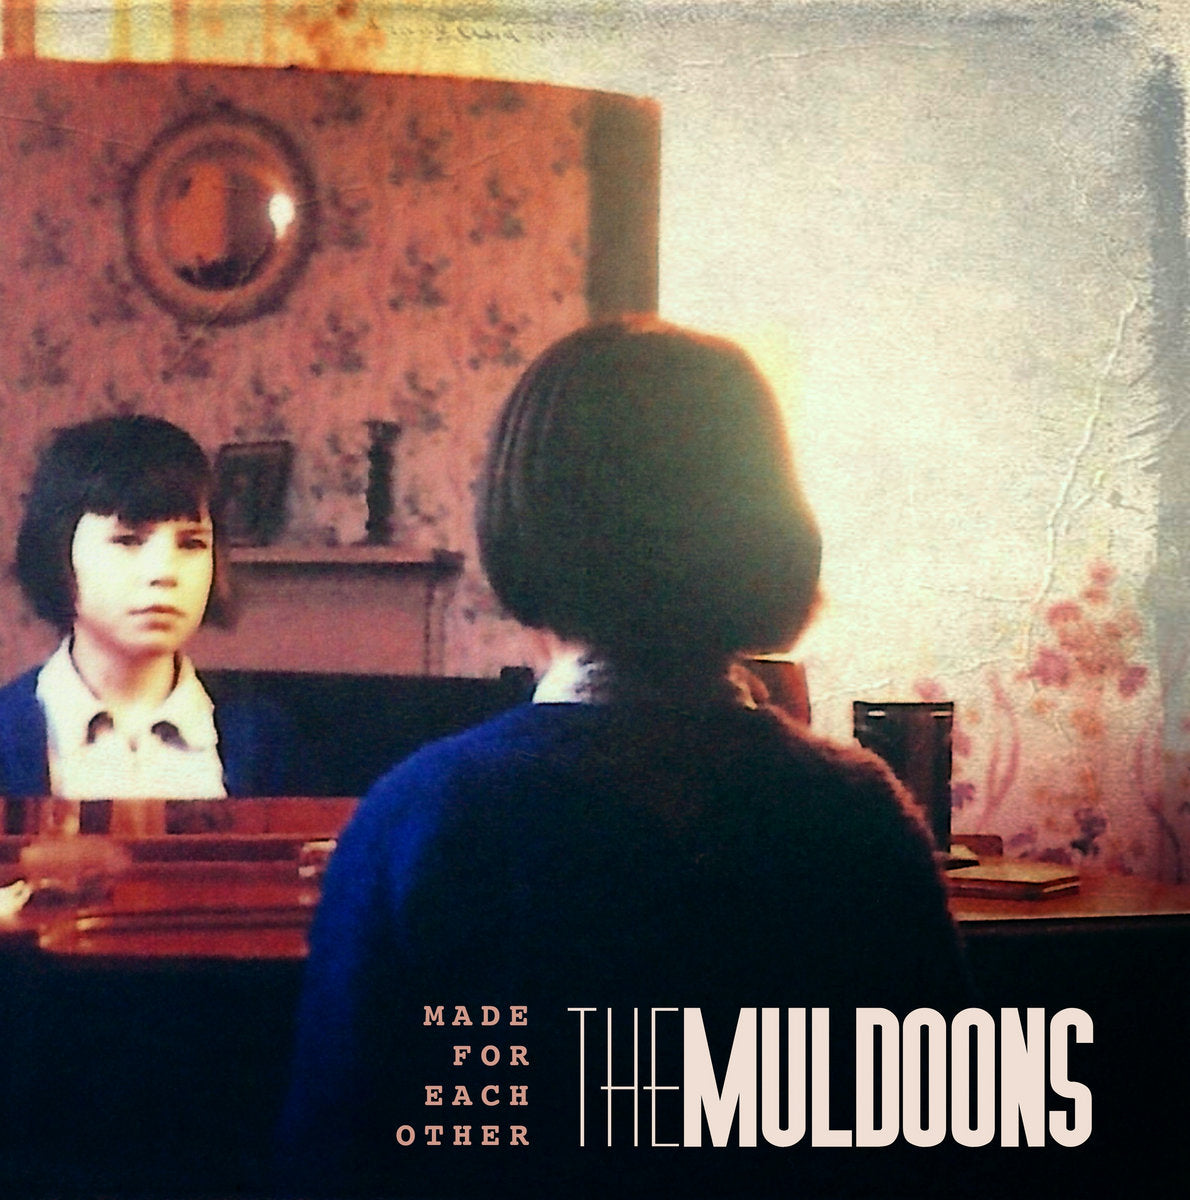 Muldoons, The - Made For Each Other (Late Night For Glasgow) LP